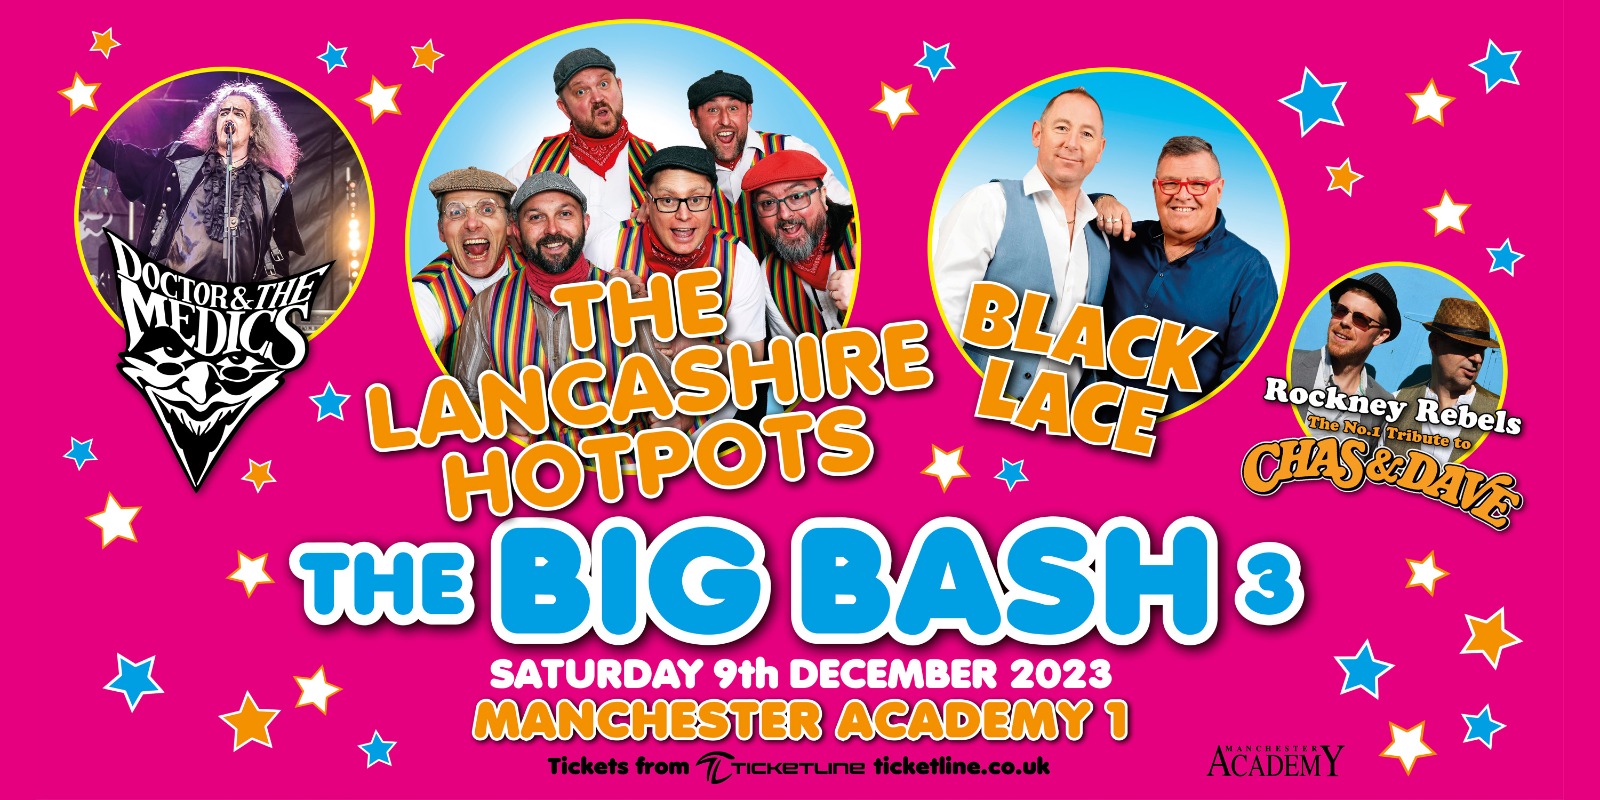 Big Bash 3 promotional image featuring The Lancashire Hotpots, Doctor & The Medics, Black Lace and Rockney Rebels